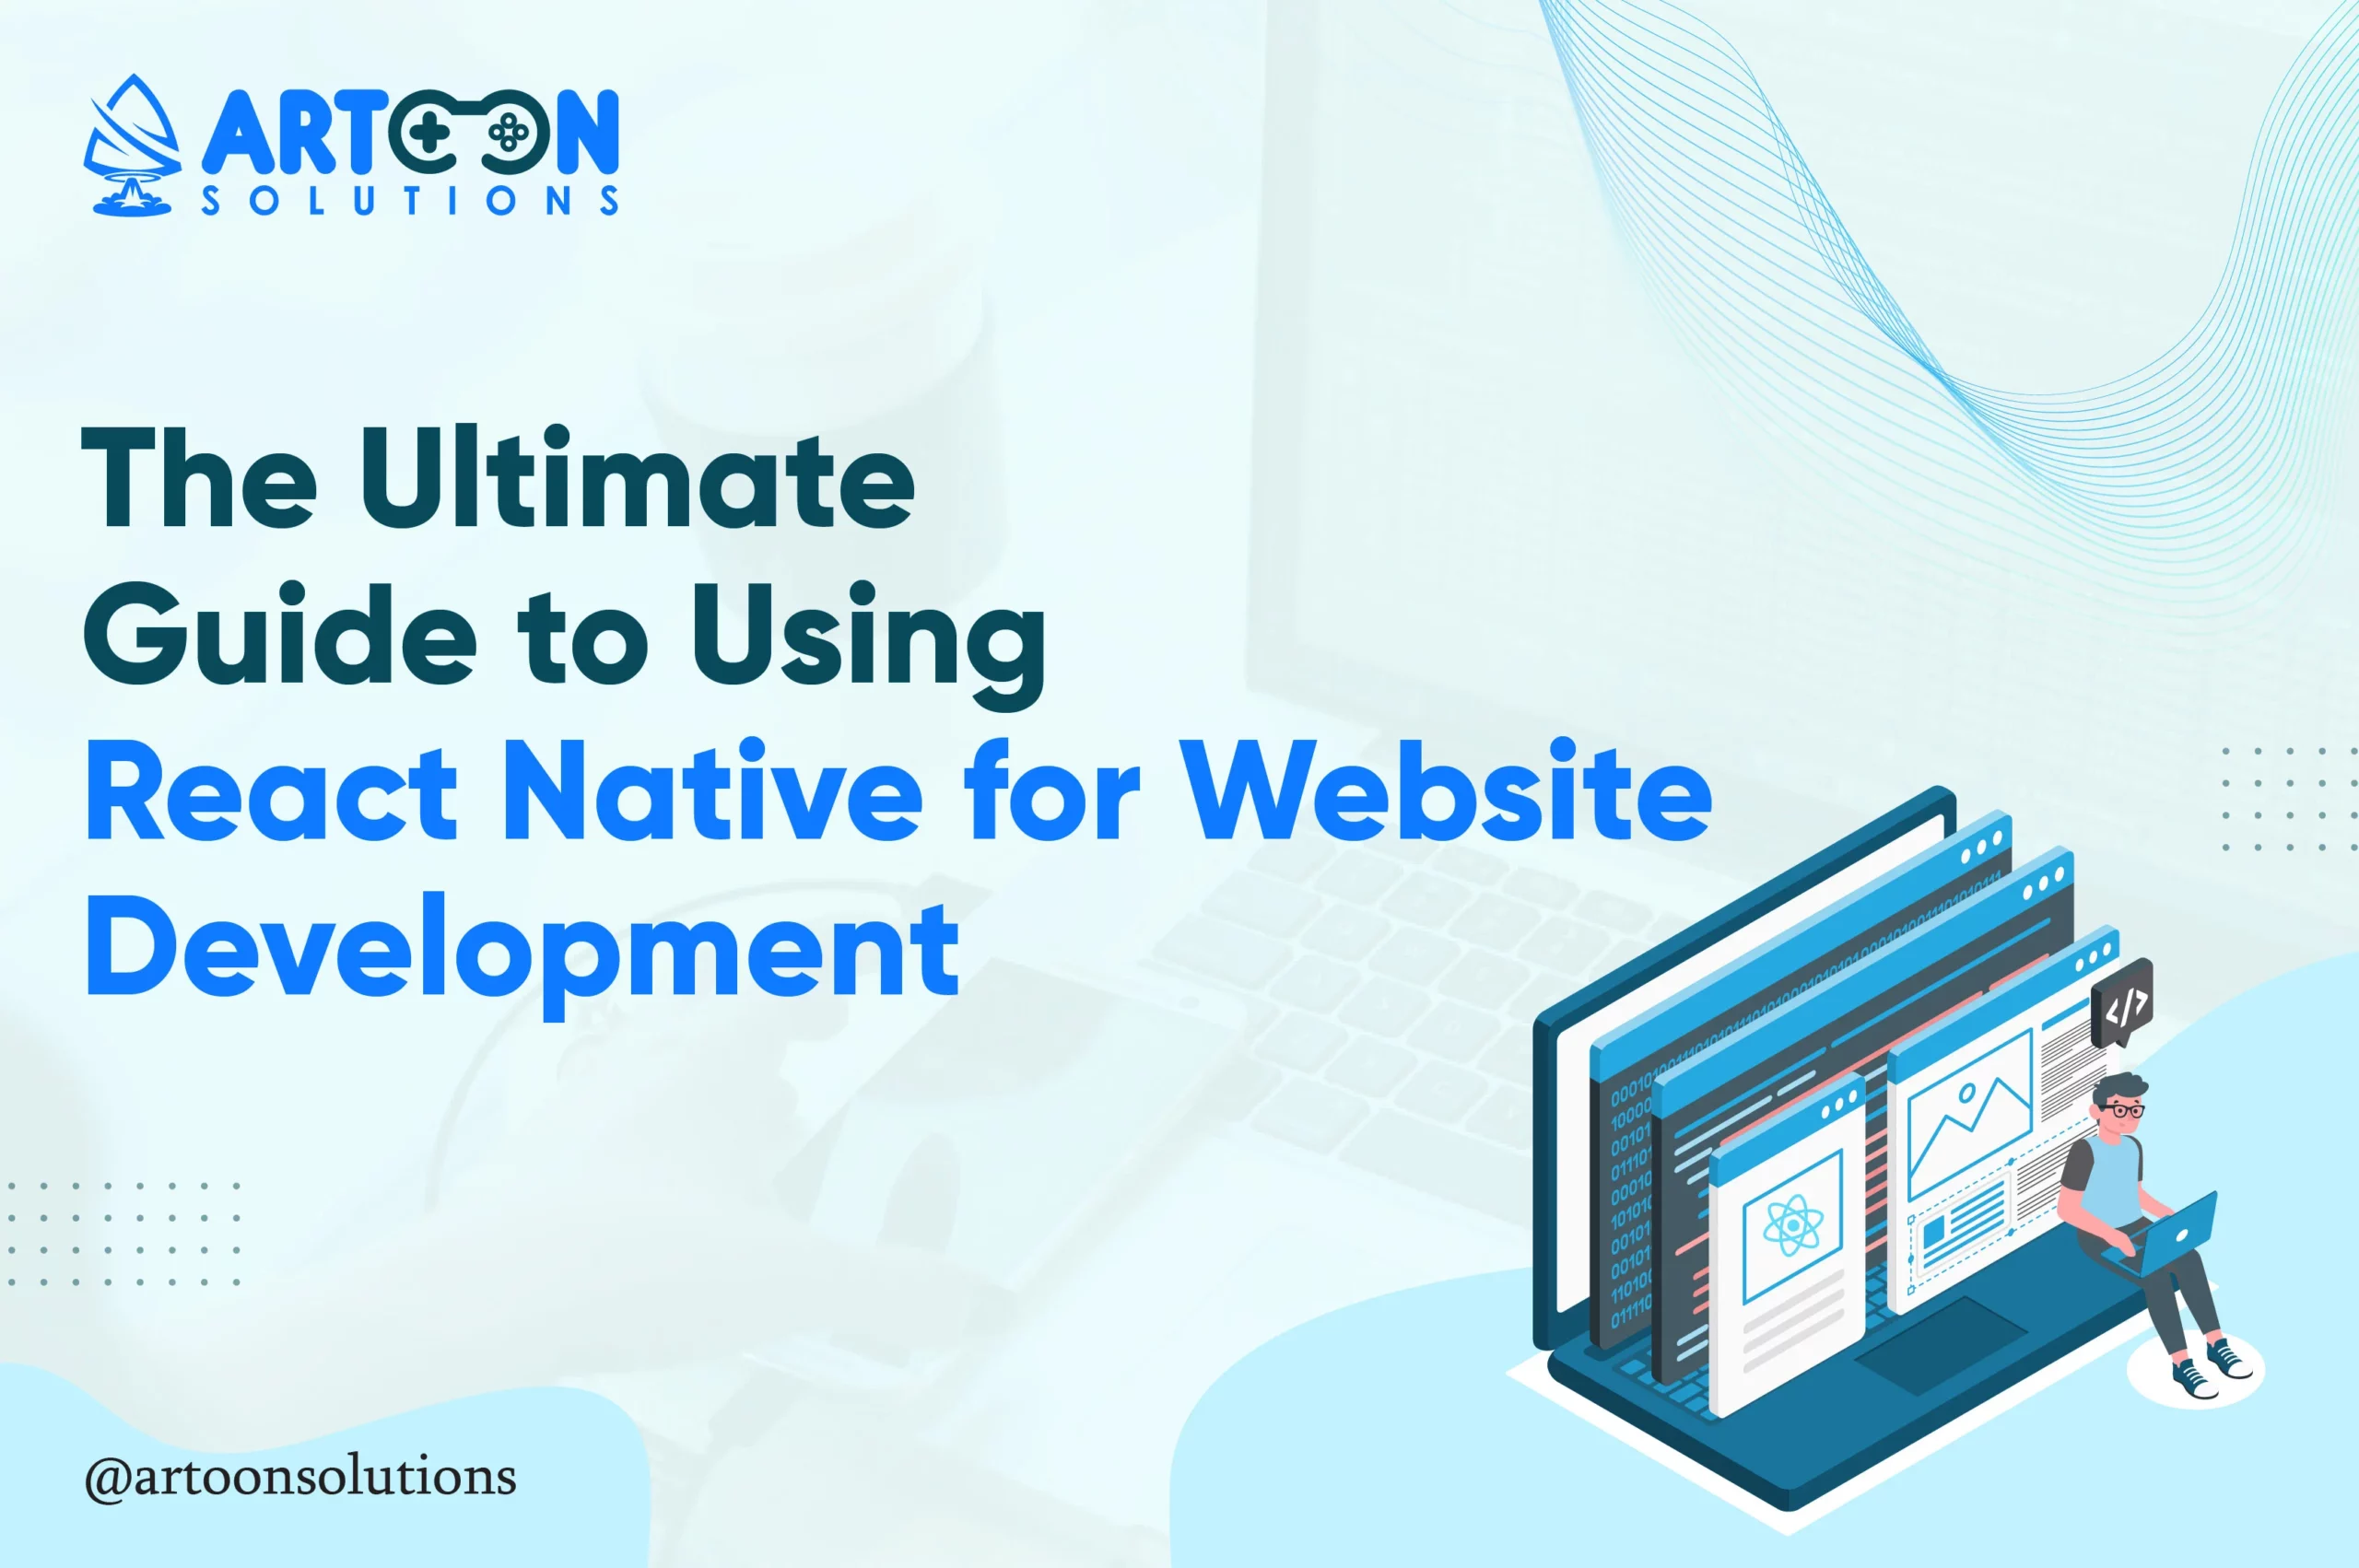 The Ultimate Guide to Using React Native for Website Development